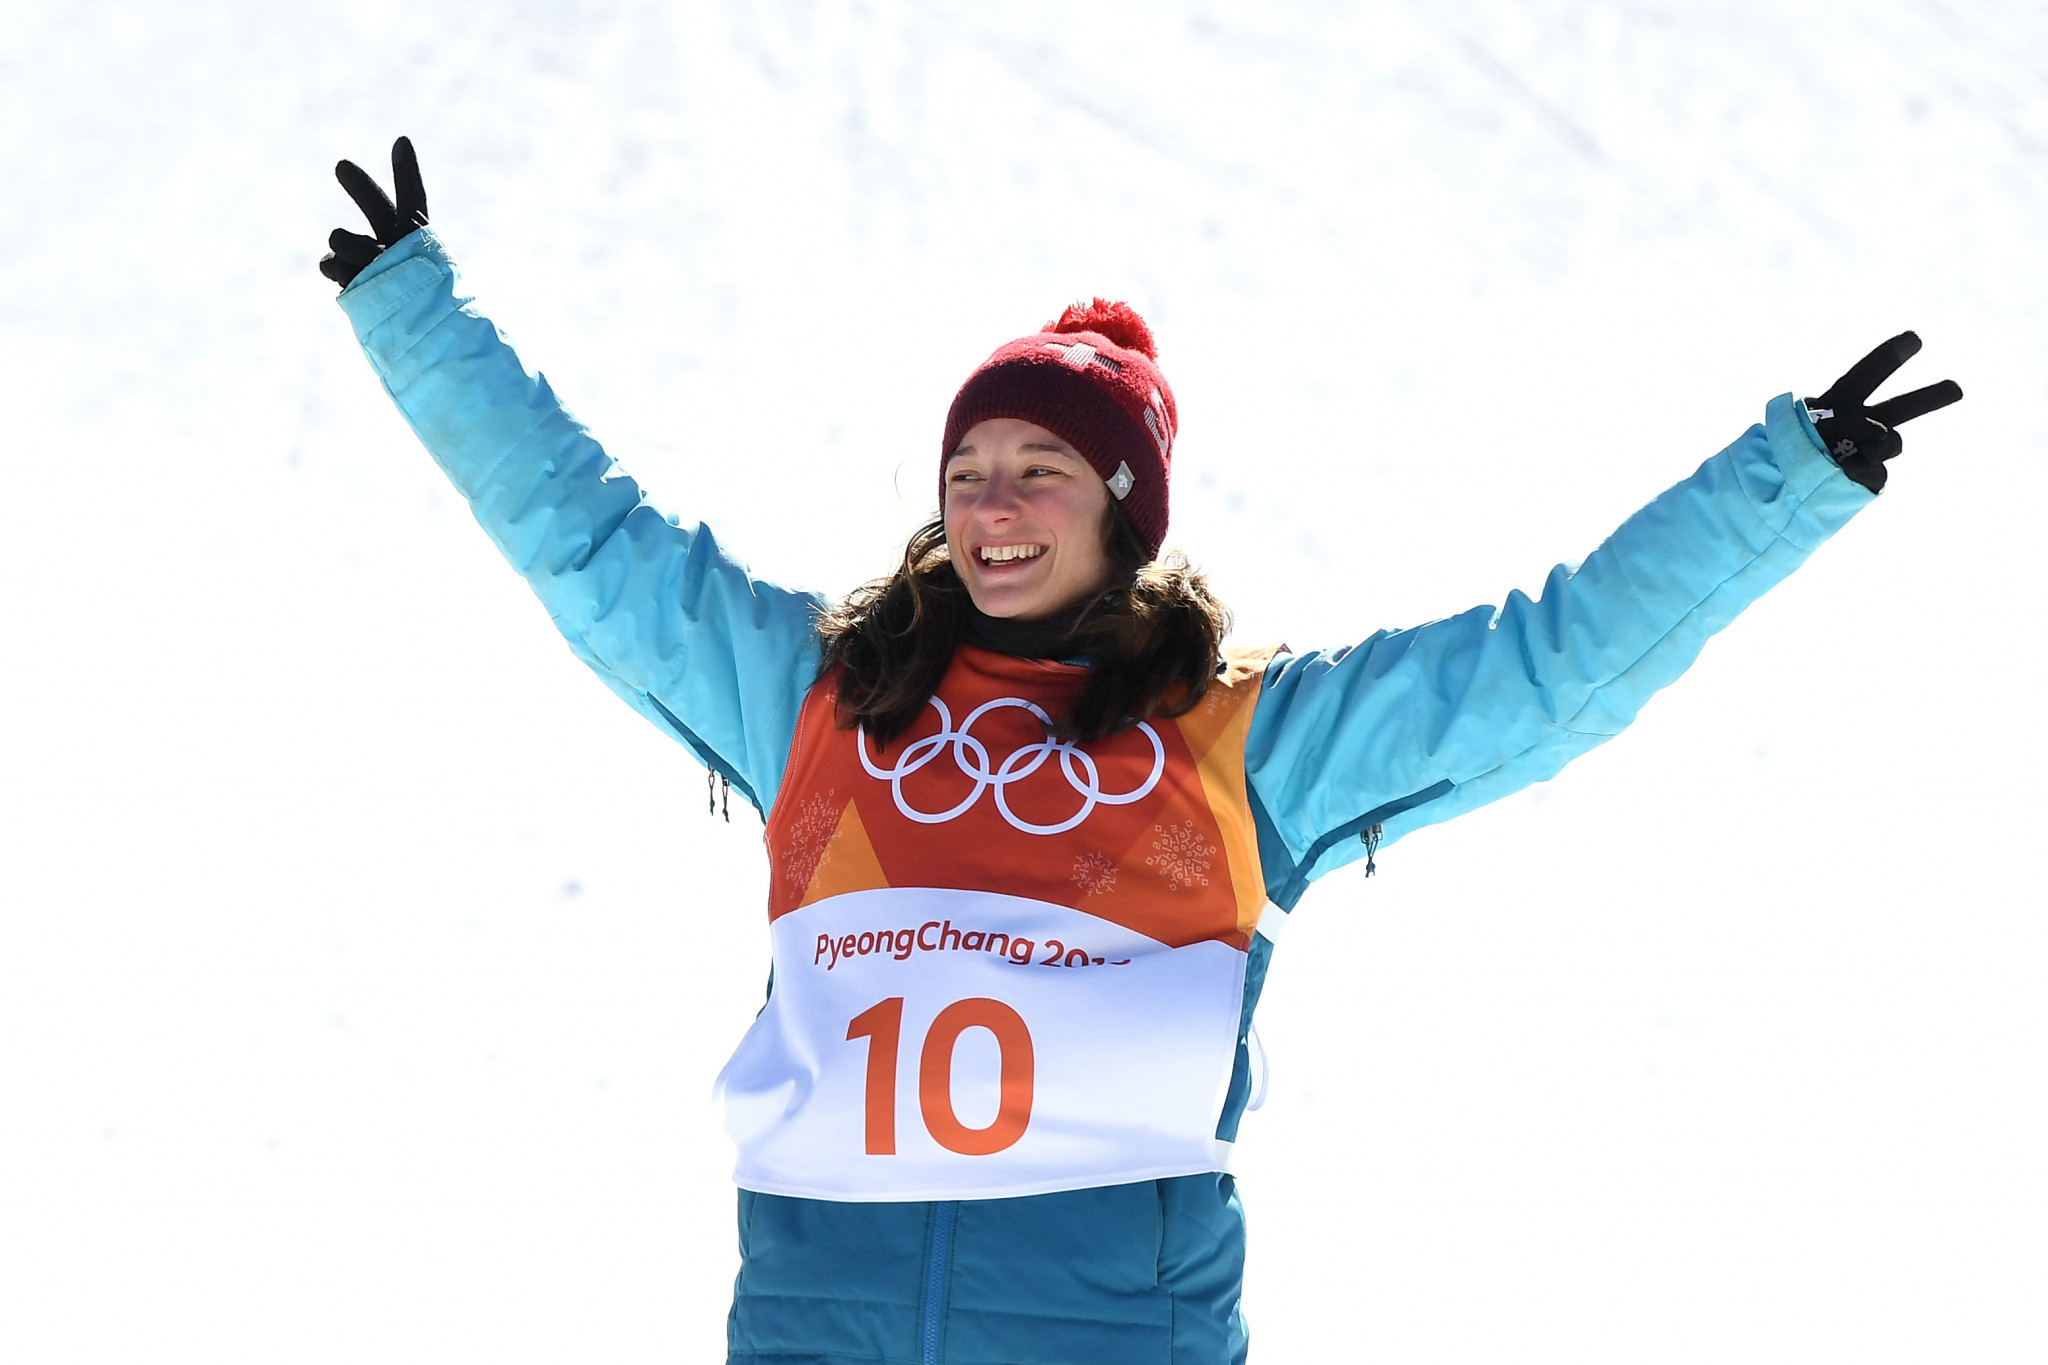 Switzerland's Sarah Höfflin saved her best performance until last as a superb display propelled her to the Olympic gold medal in the women's ski slopestyle event ©Getty Images